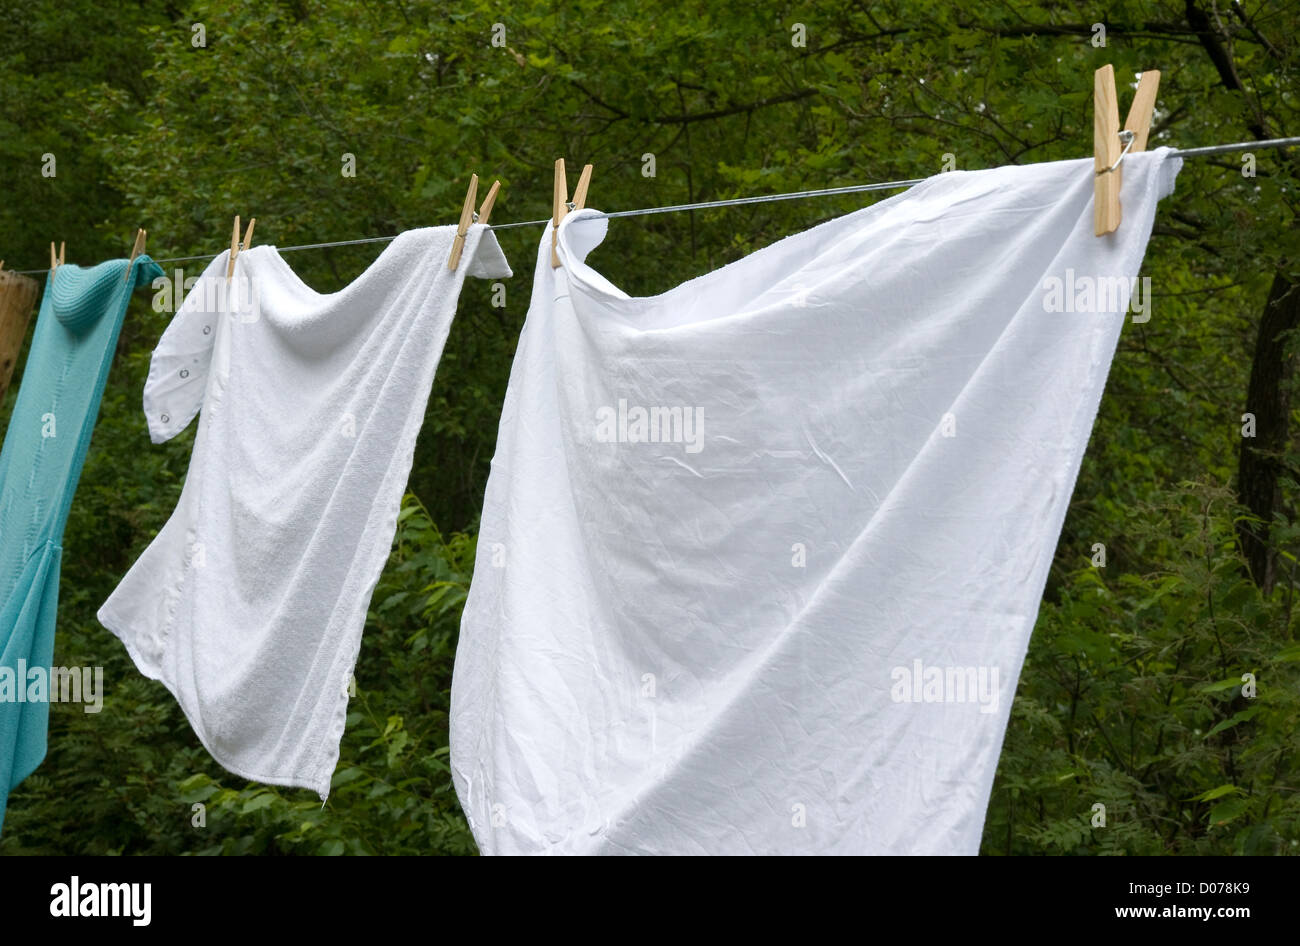 Clothes drying in the wind hanging on a clothesline Stock Photo